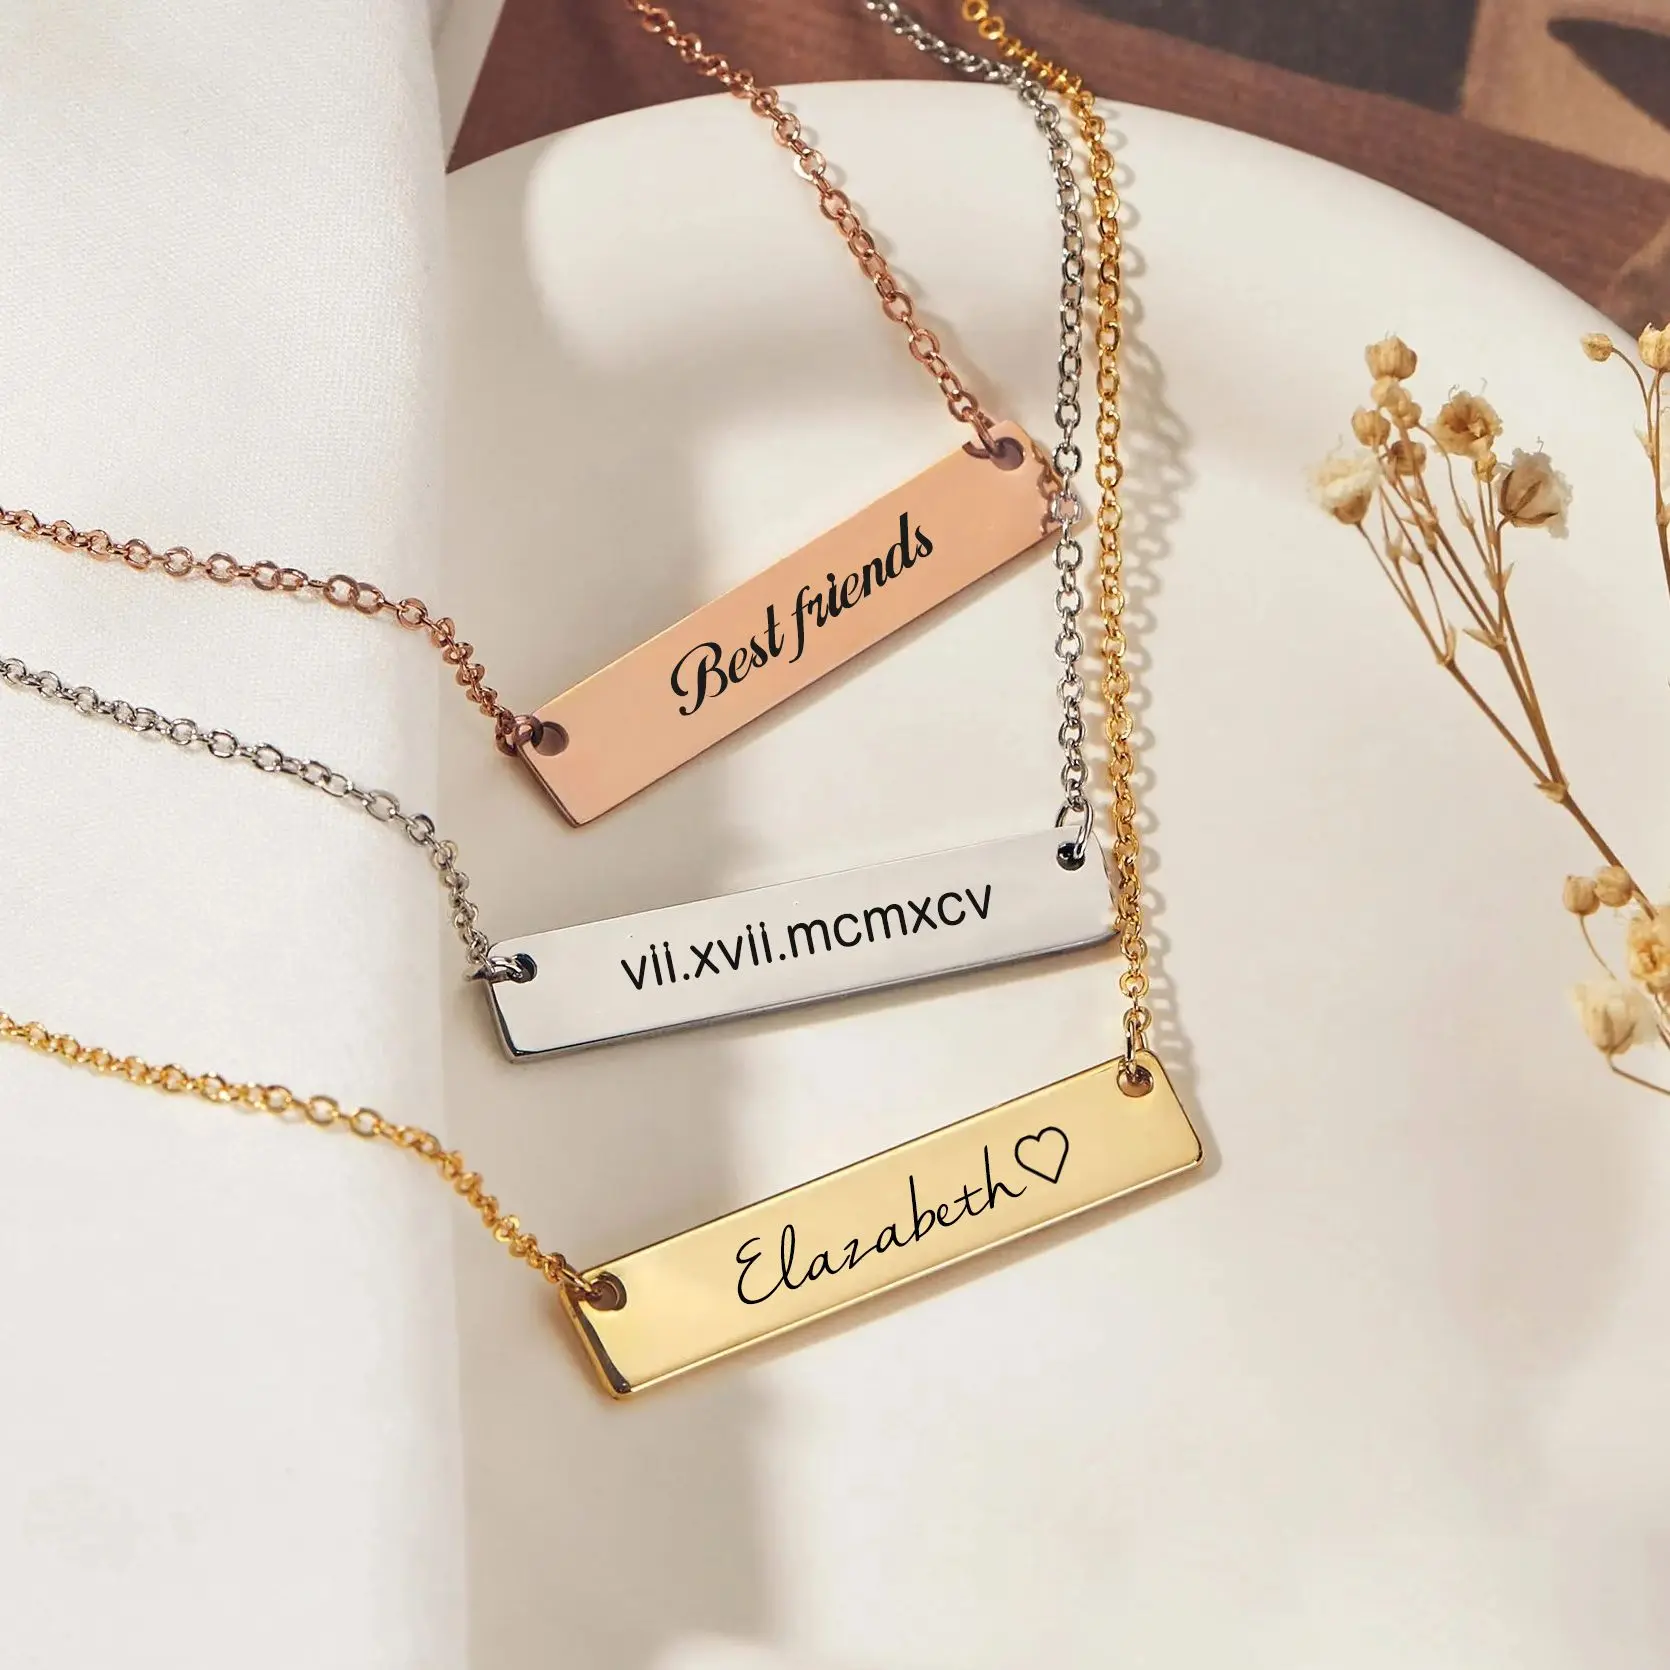 Daily Engraved Name Bar Necklace Custom Text Square Necklace with Rolo Chain Nameplate Jewelry Gift Birthday Gift for Woman 3 5 4 5 6 custom waterproof stickers with your image photo text or logo personalized design wedding label baptism commercial